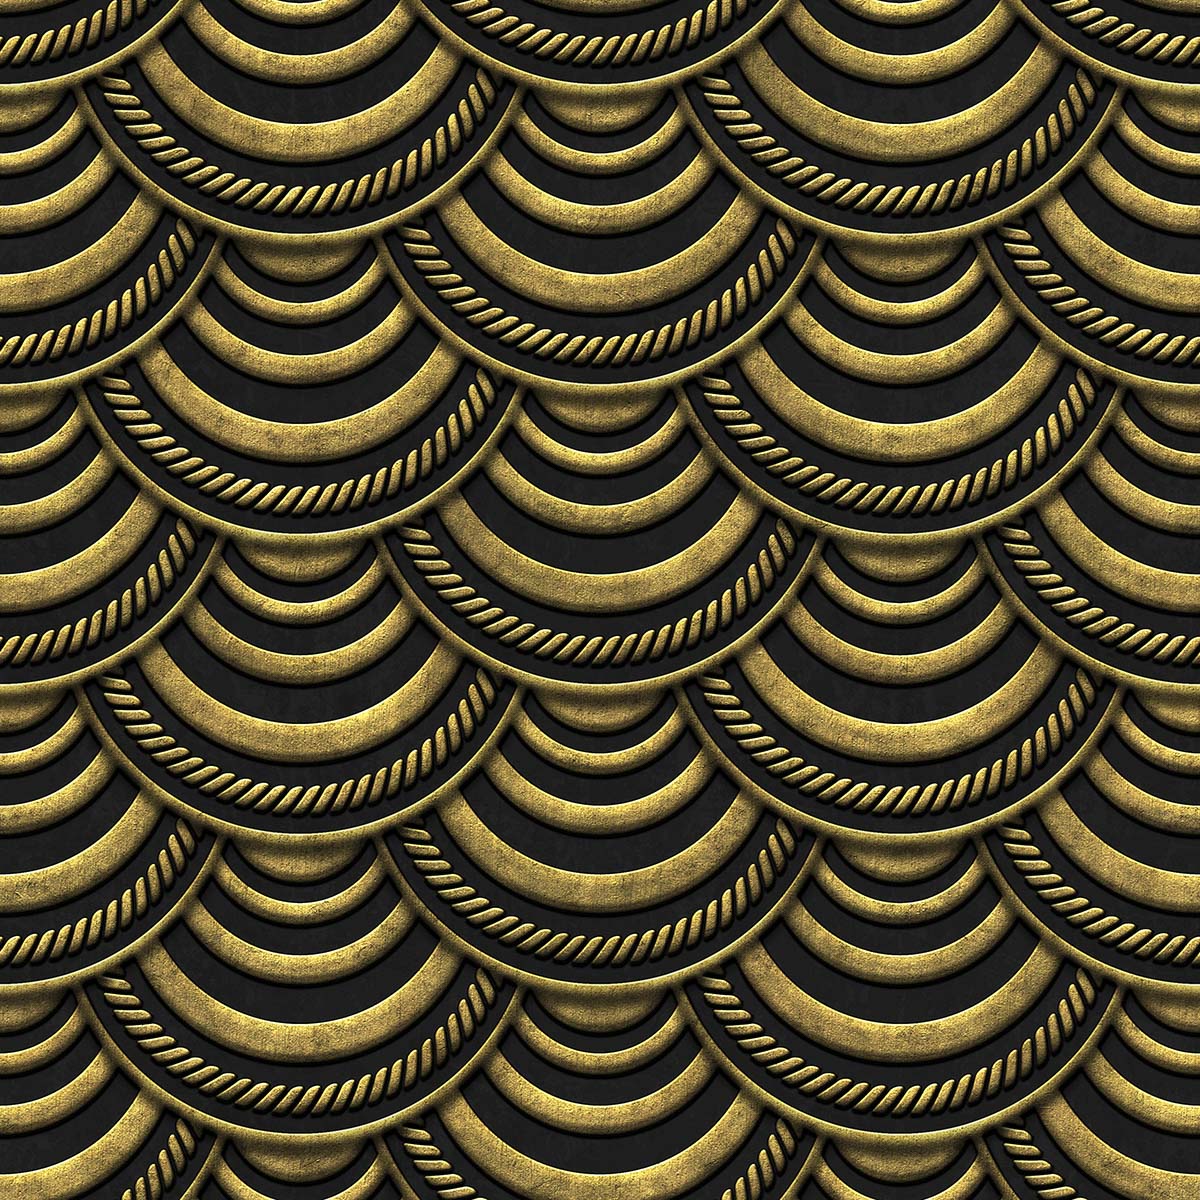 3D Gold and Black Patterned Wallpaper for Wall